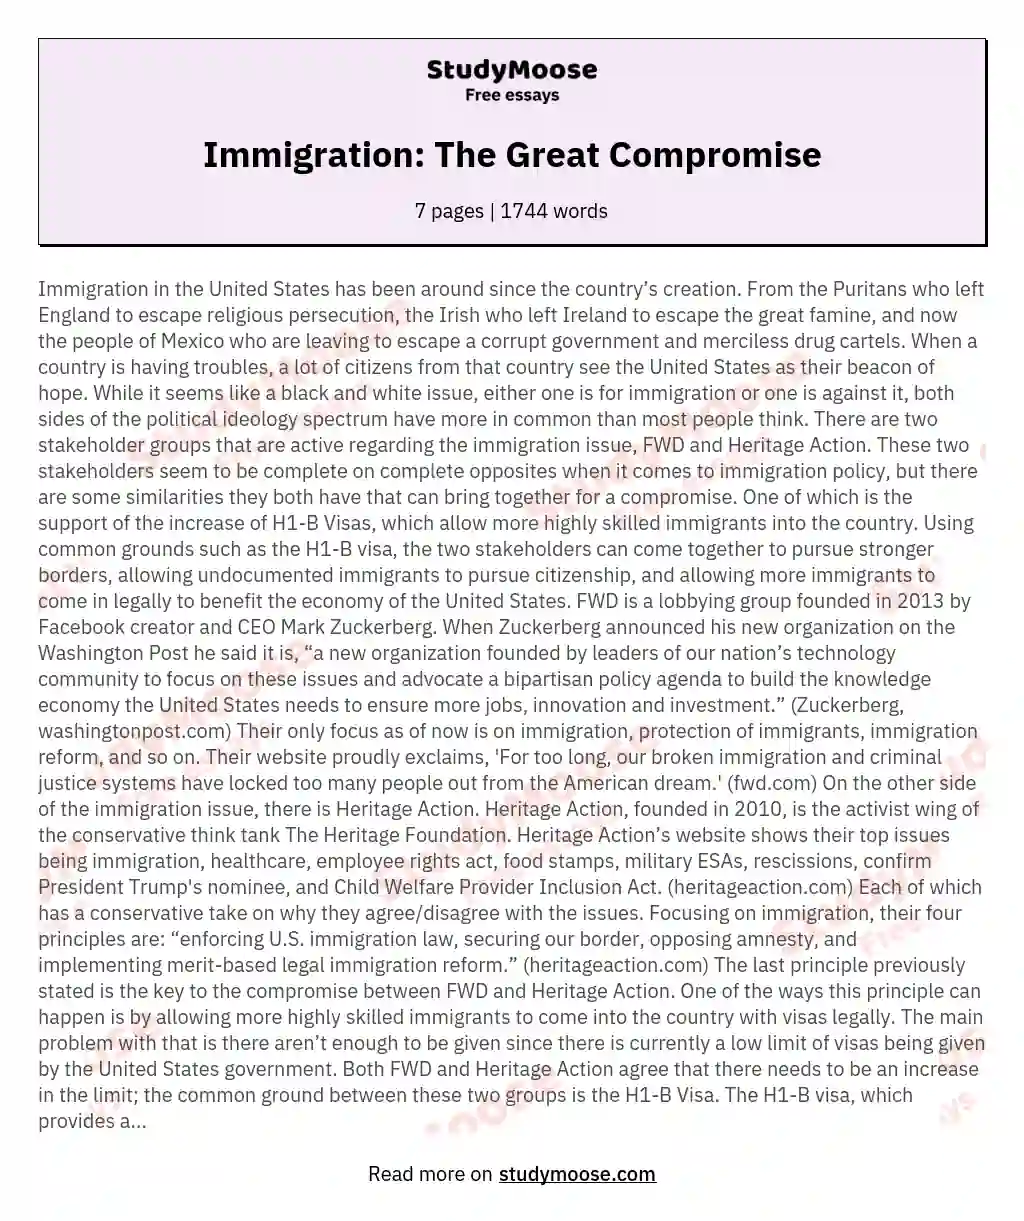 Immigration: The Great Compromise essay